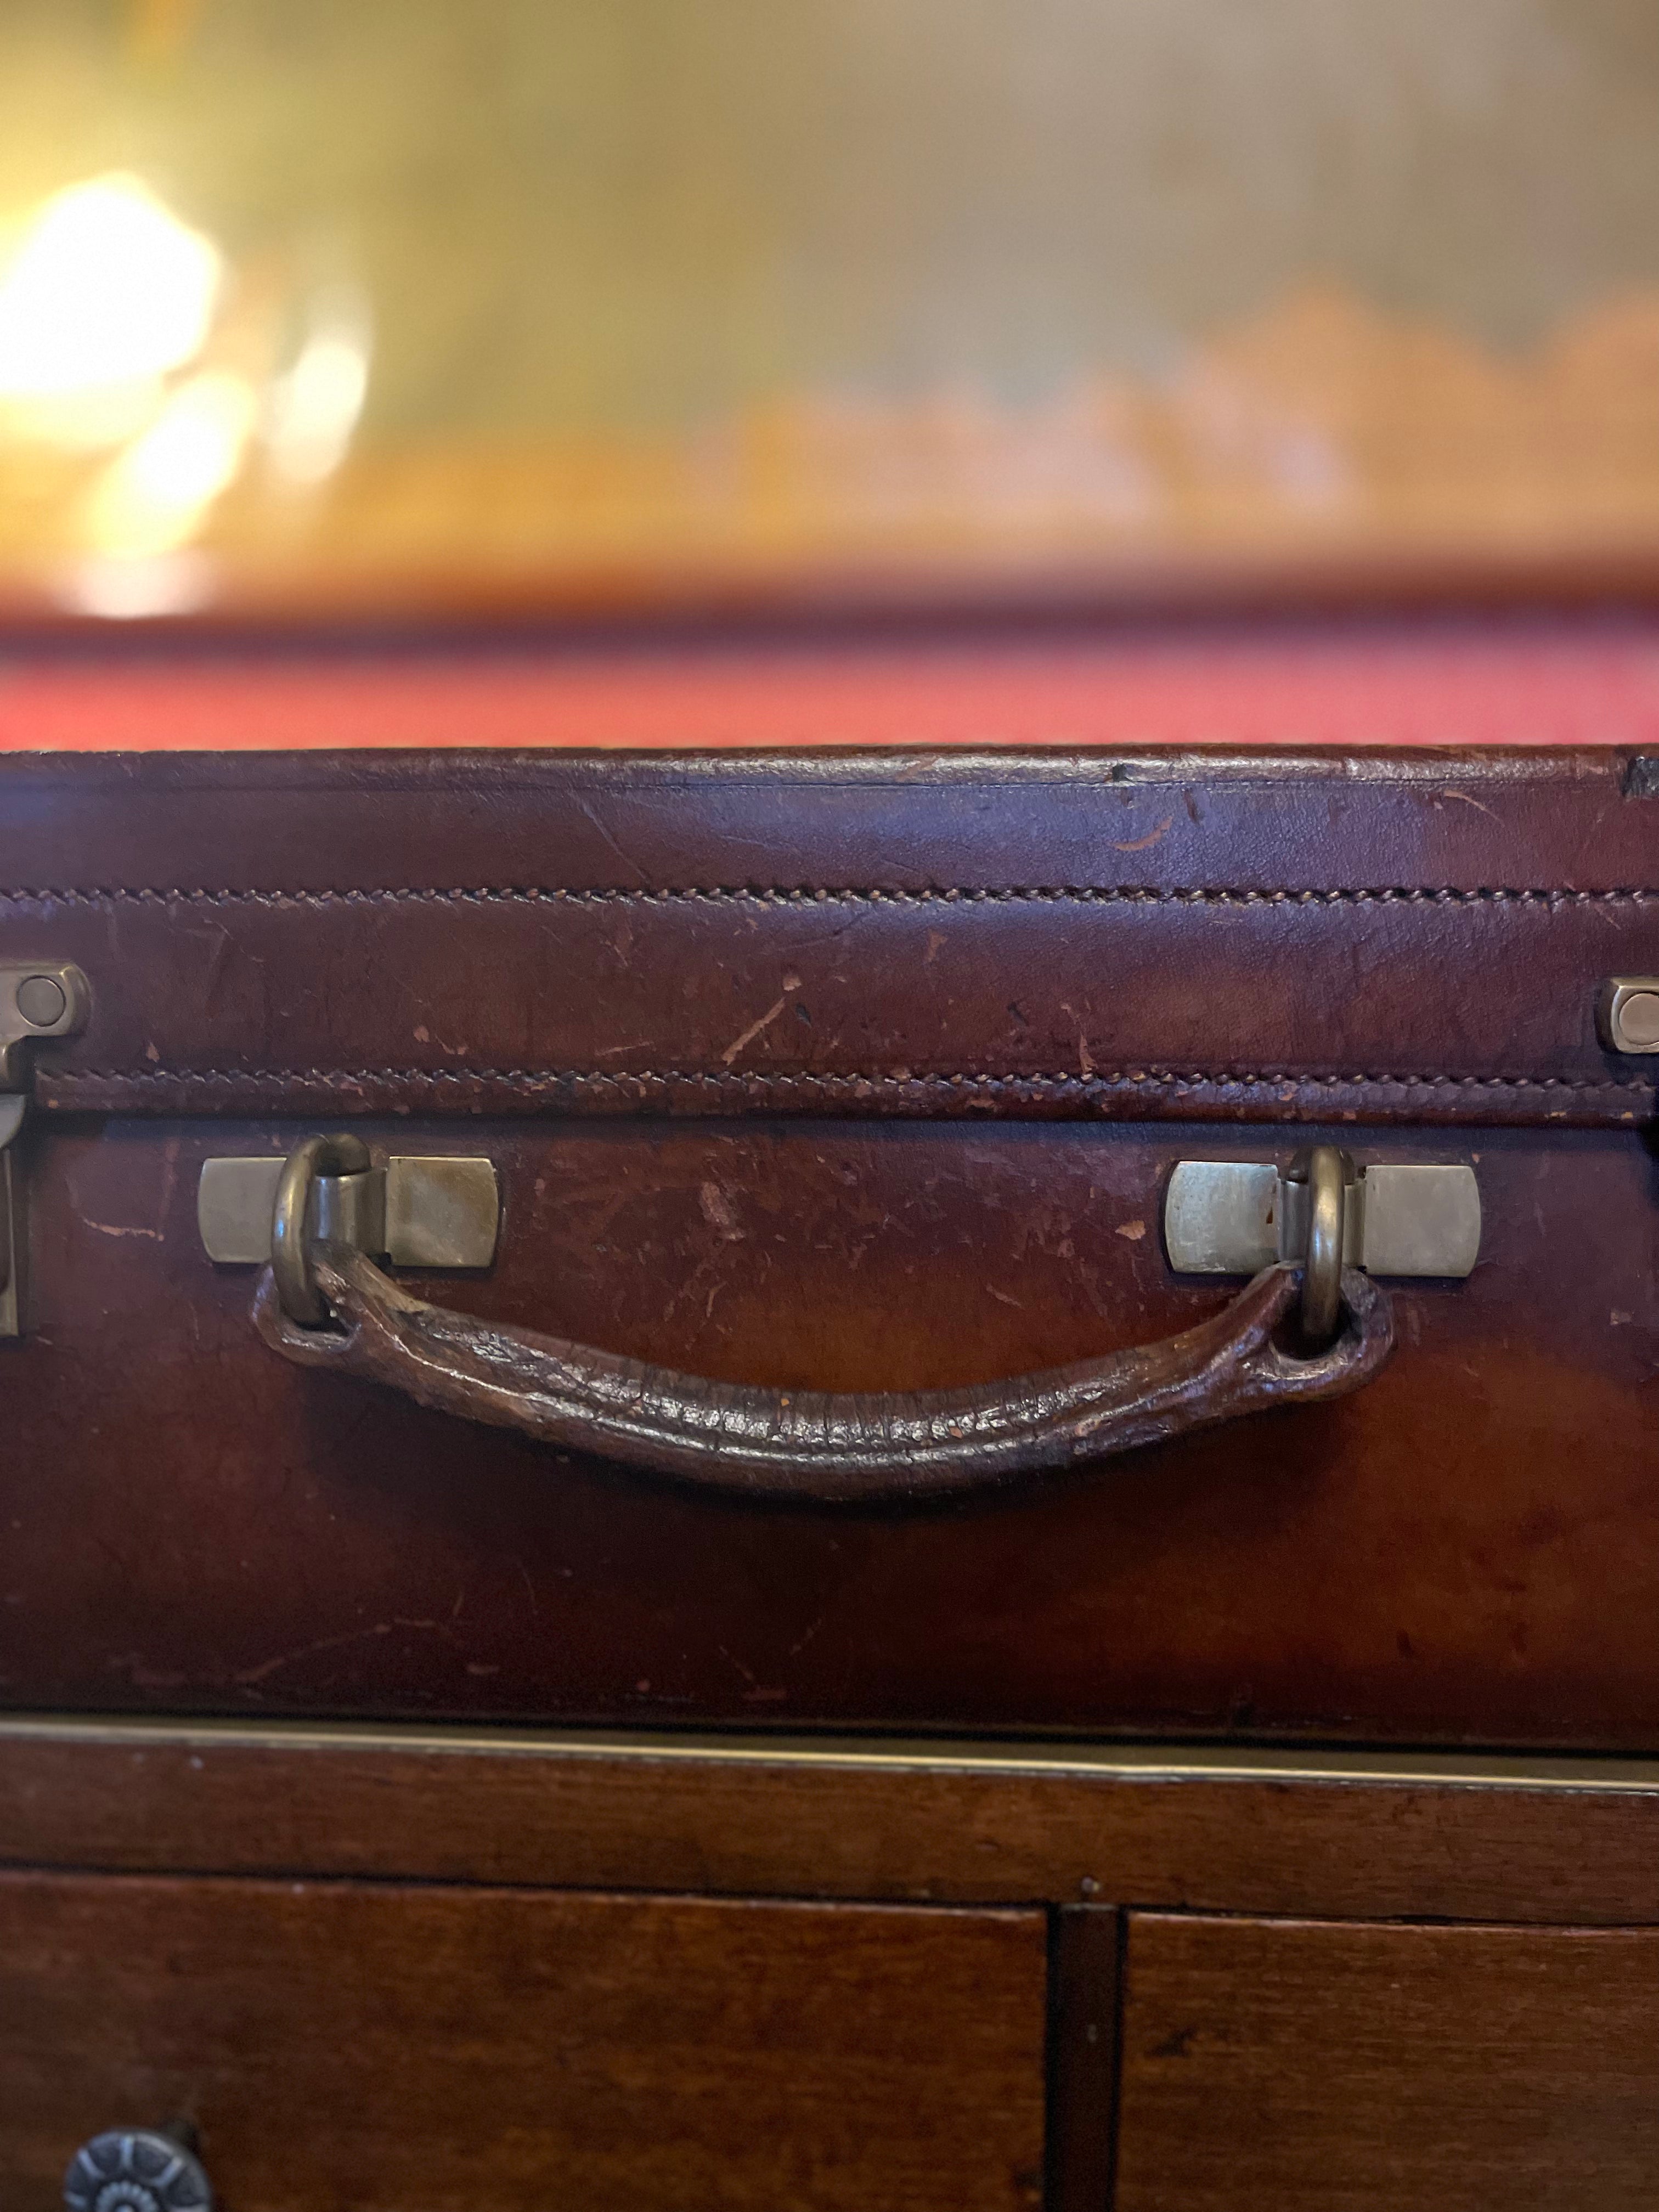 1920s Finnigans Leather Dressing Case